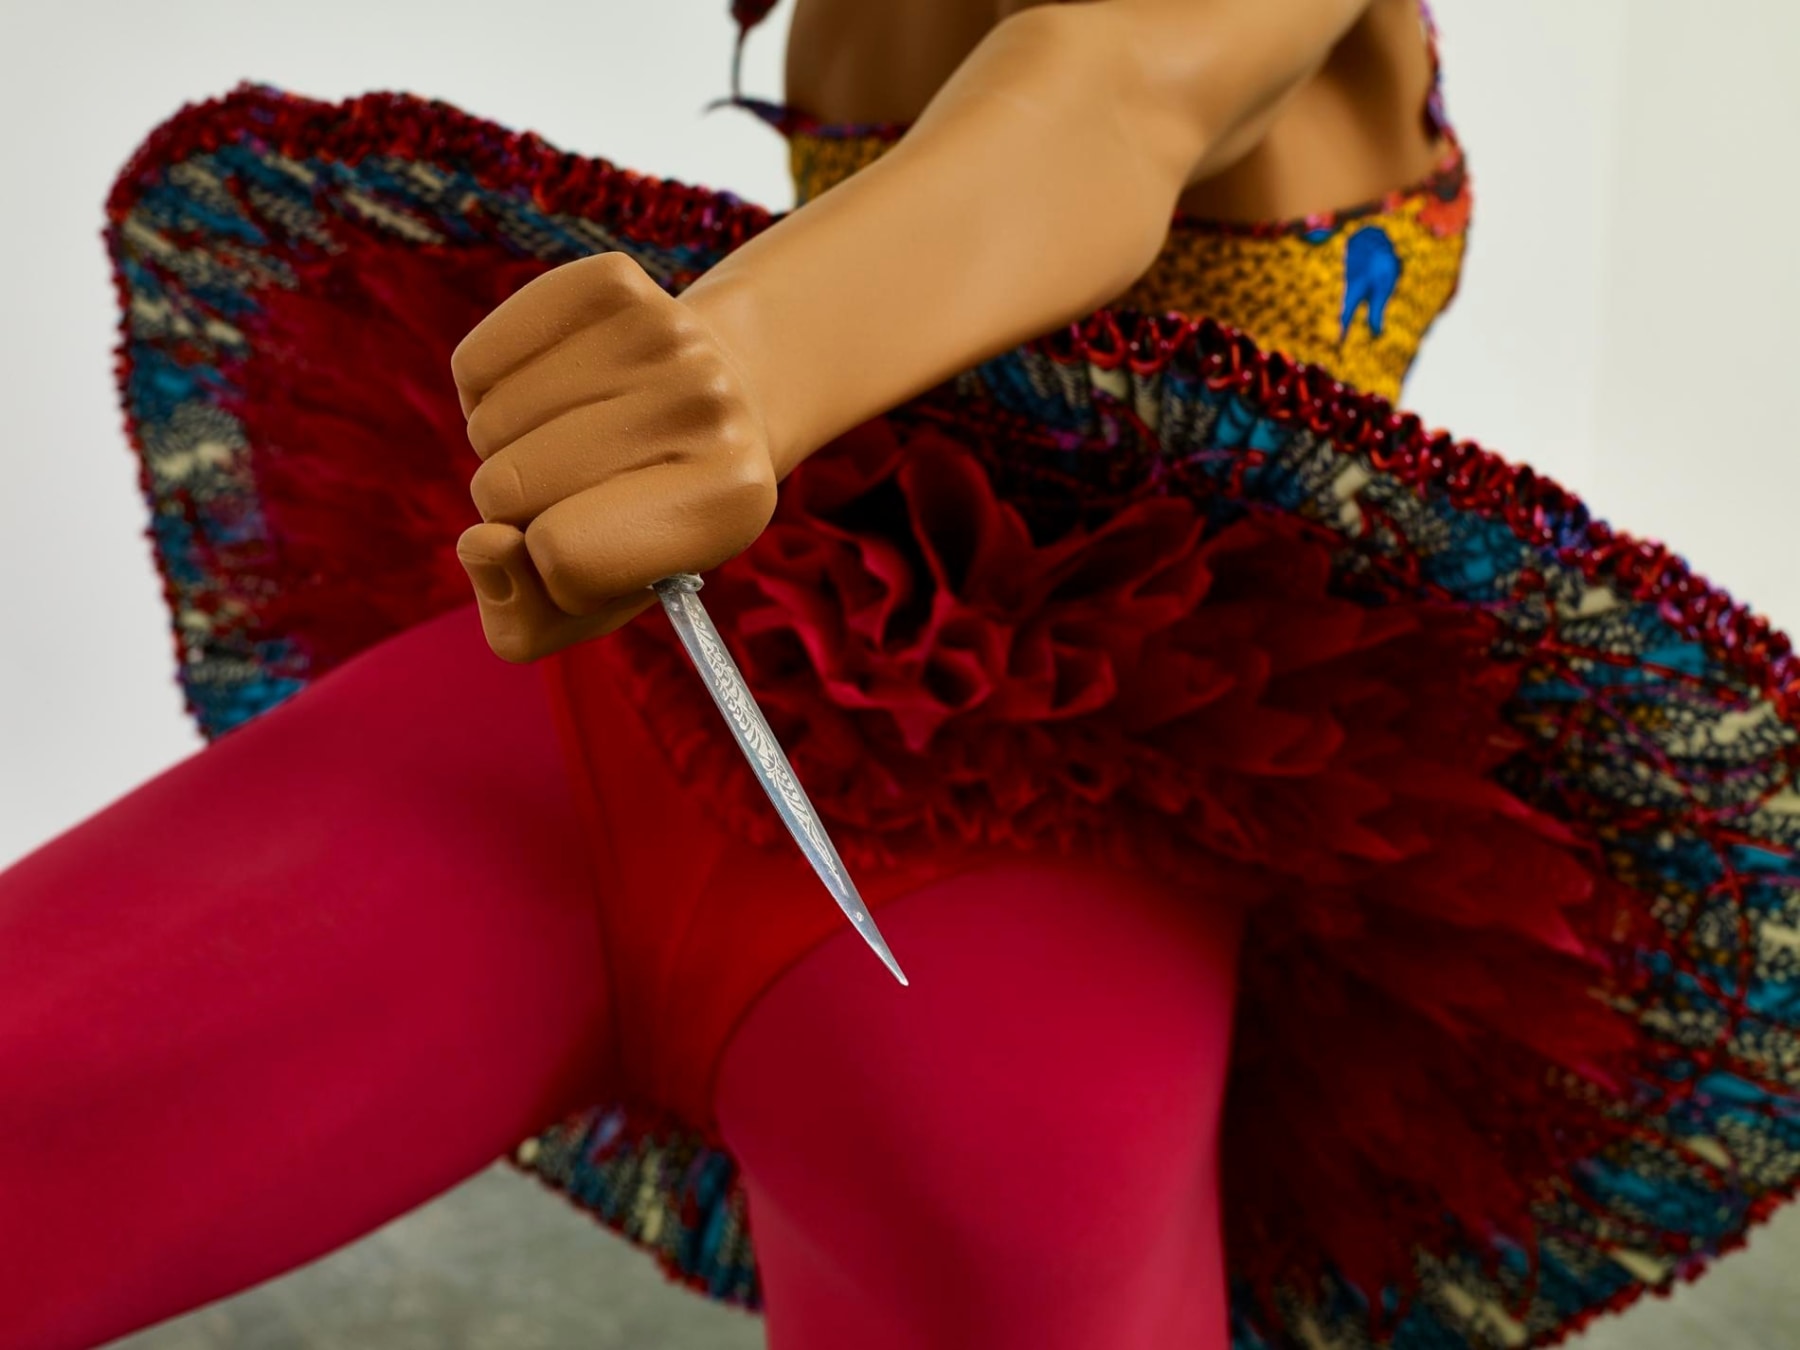 close up of the pocket knife held by the dancing mannequin